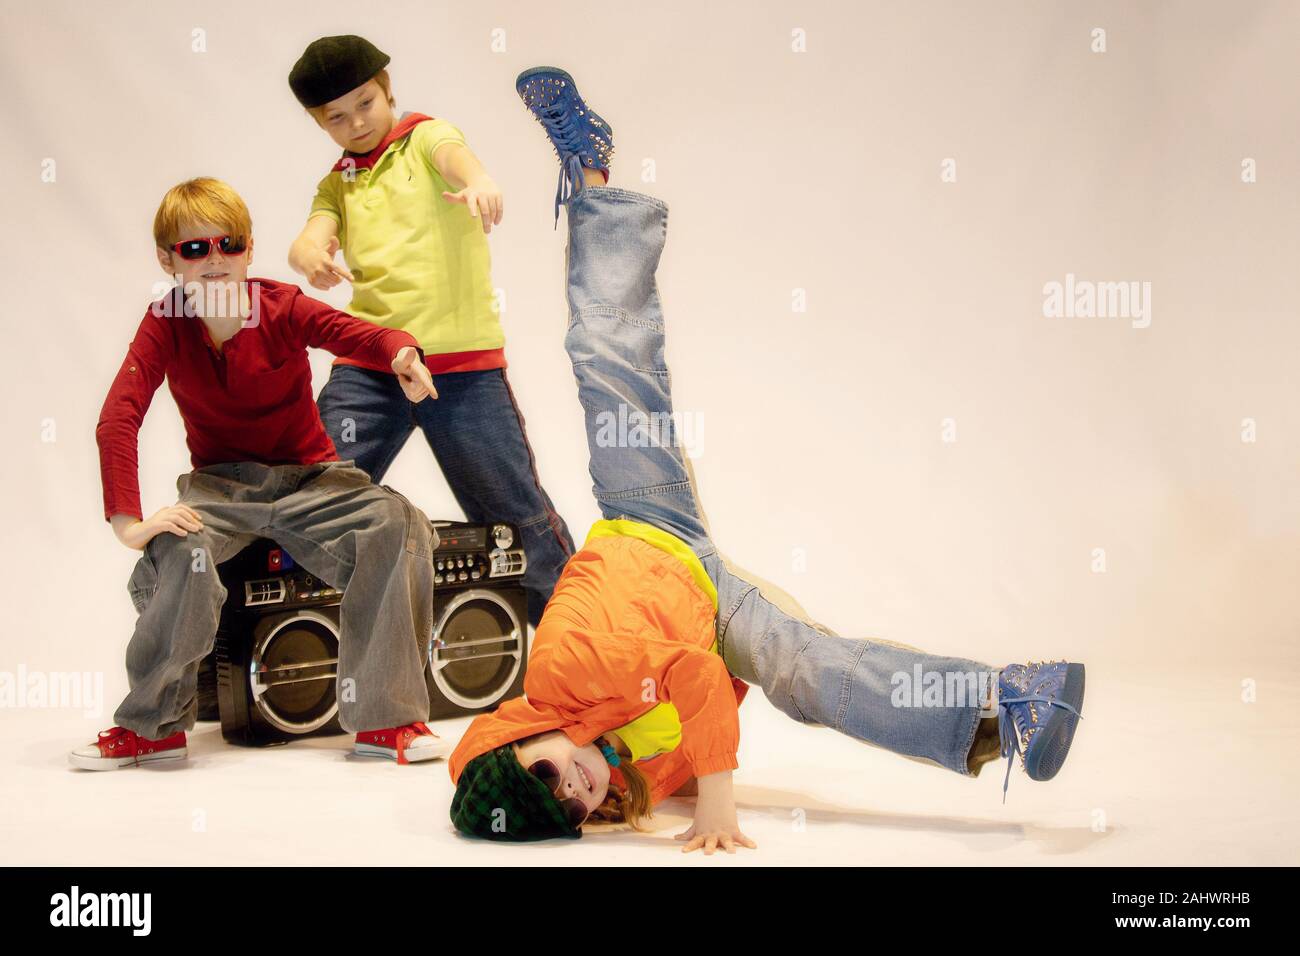 a group of children, breakdance kids Stock Photo